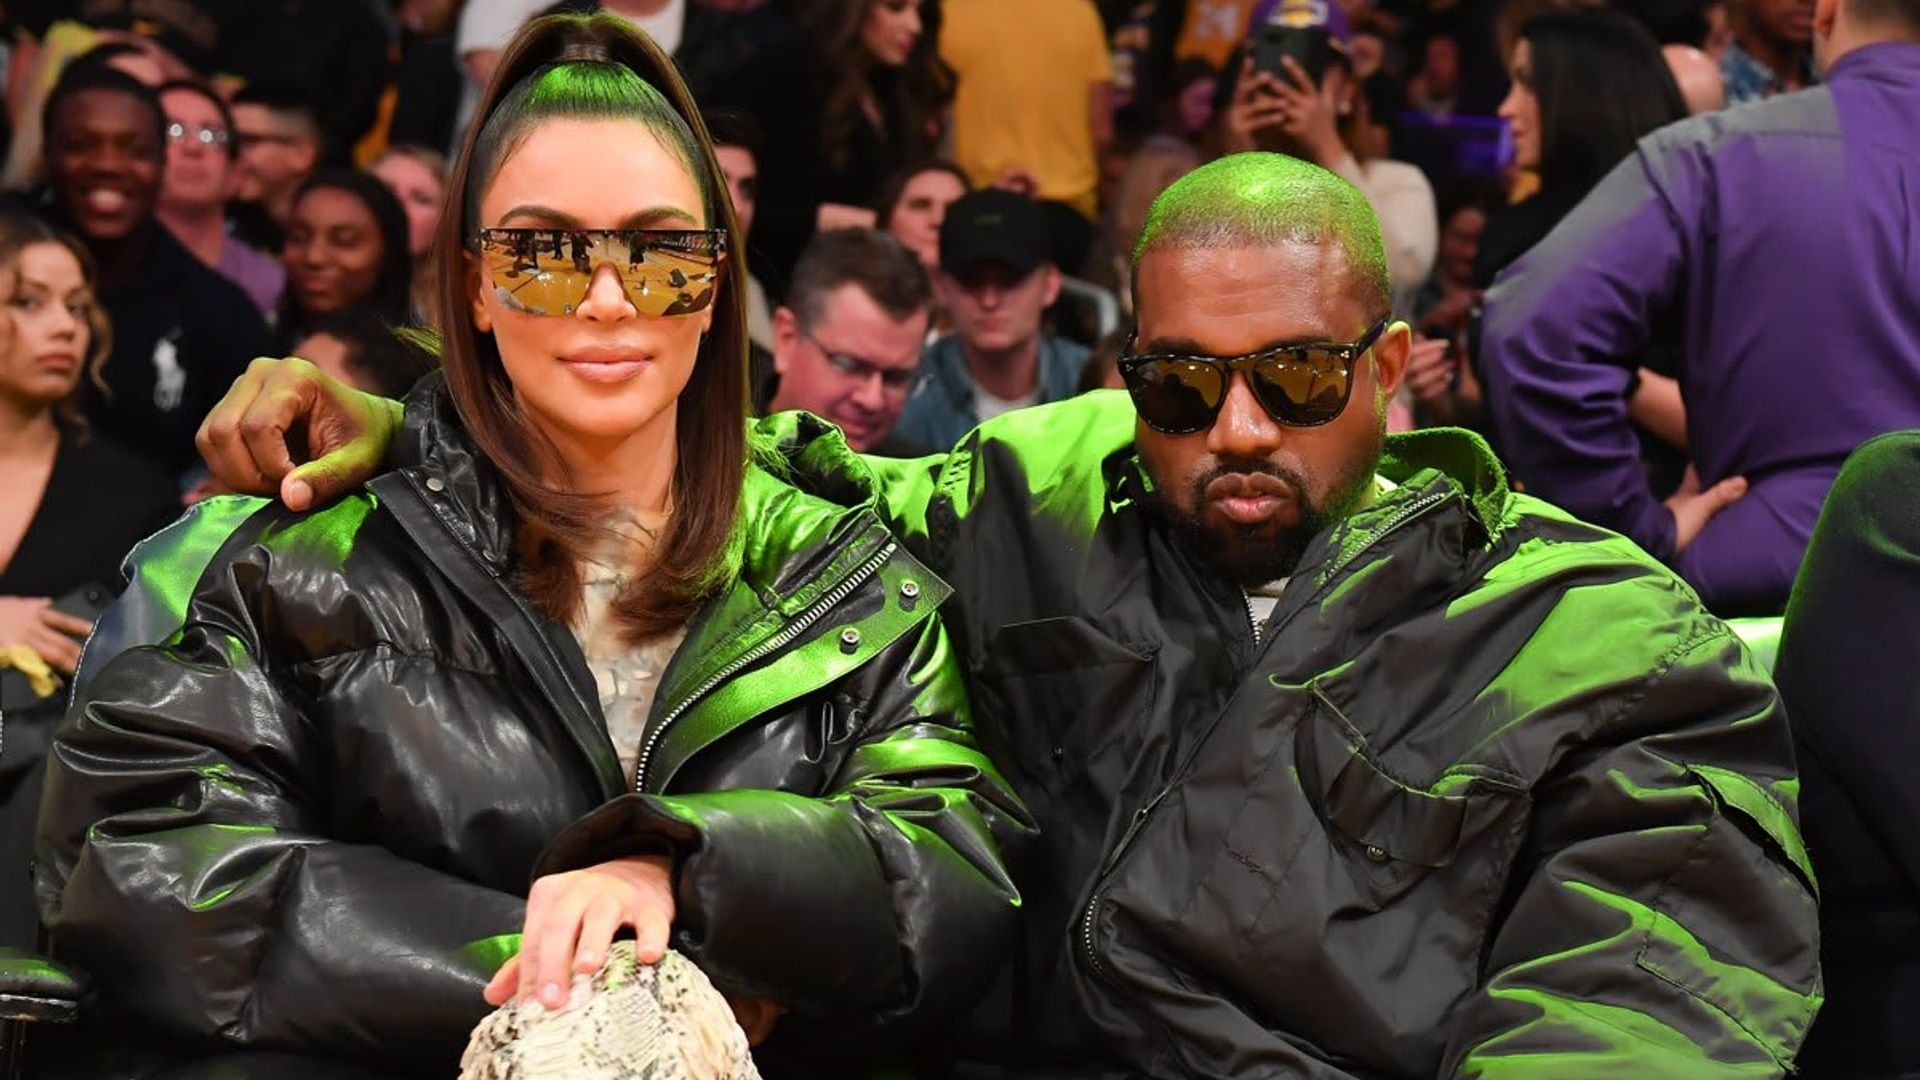 Fans are speculating if Kim Kardashian misses Kanye West after she posted a love quote on Instagram